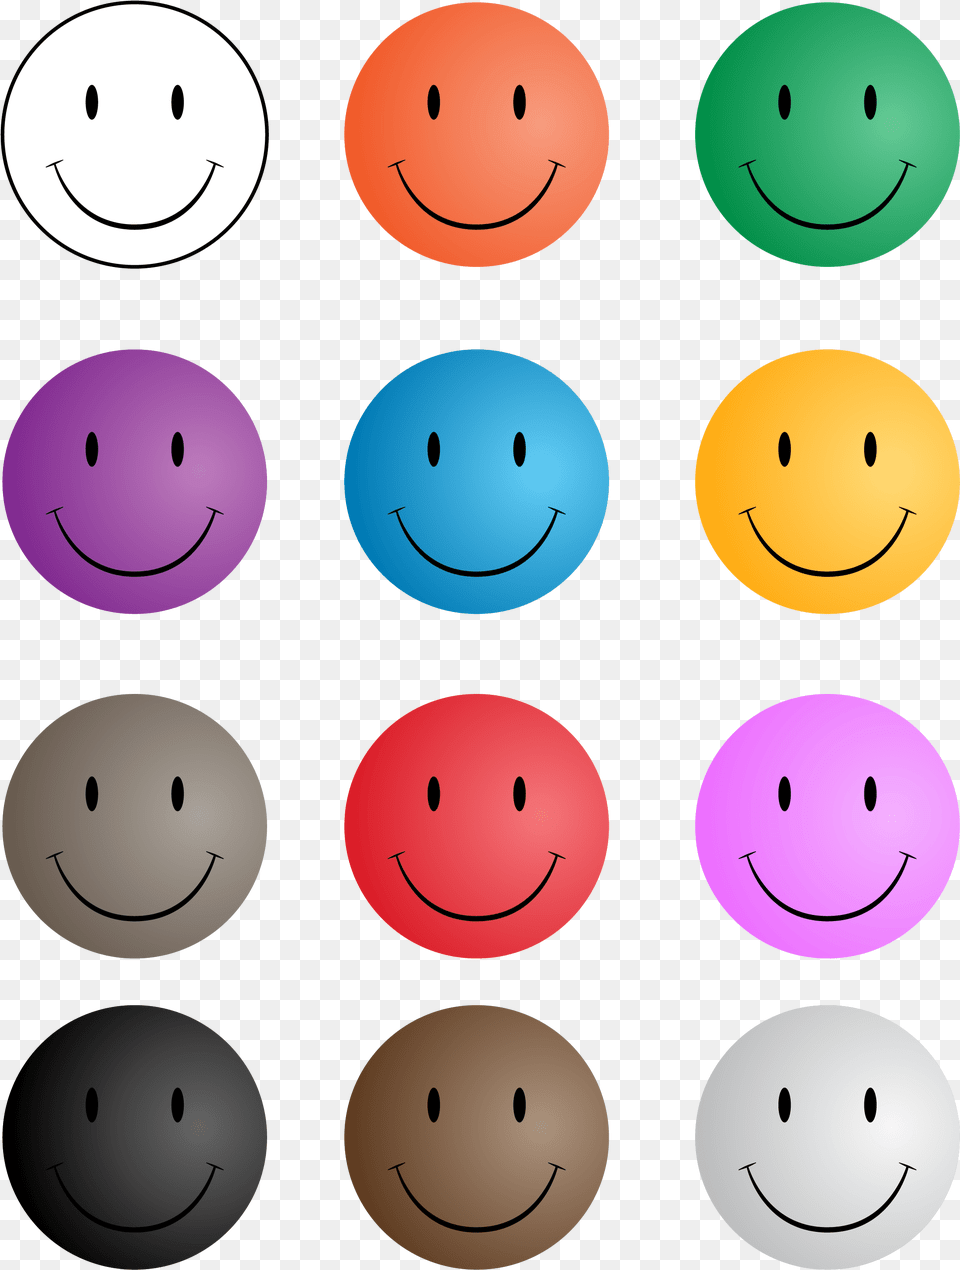 Printable Smiley Faces For Kids Printables Printable Smiley Face Symbol, Sphere Png Image